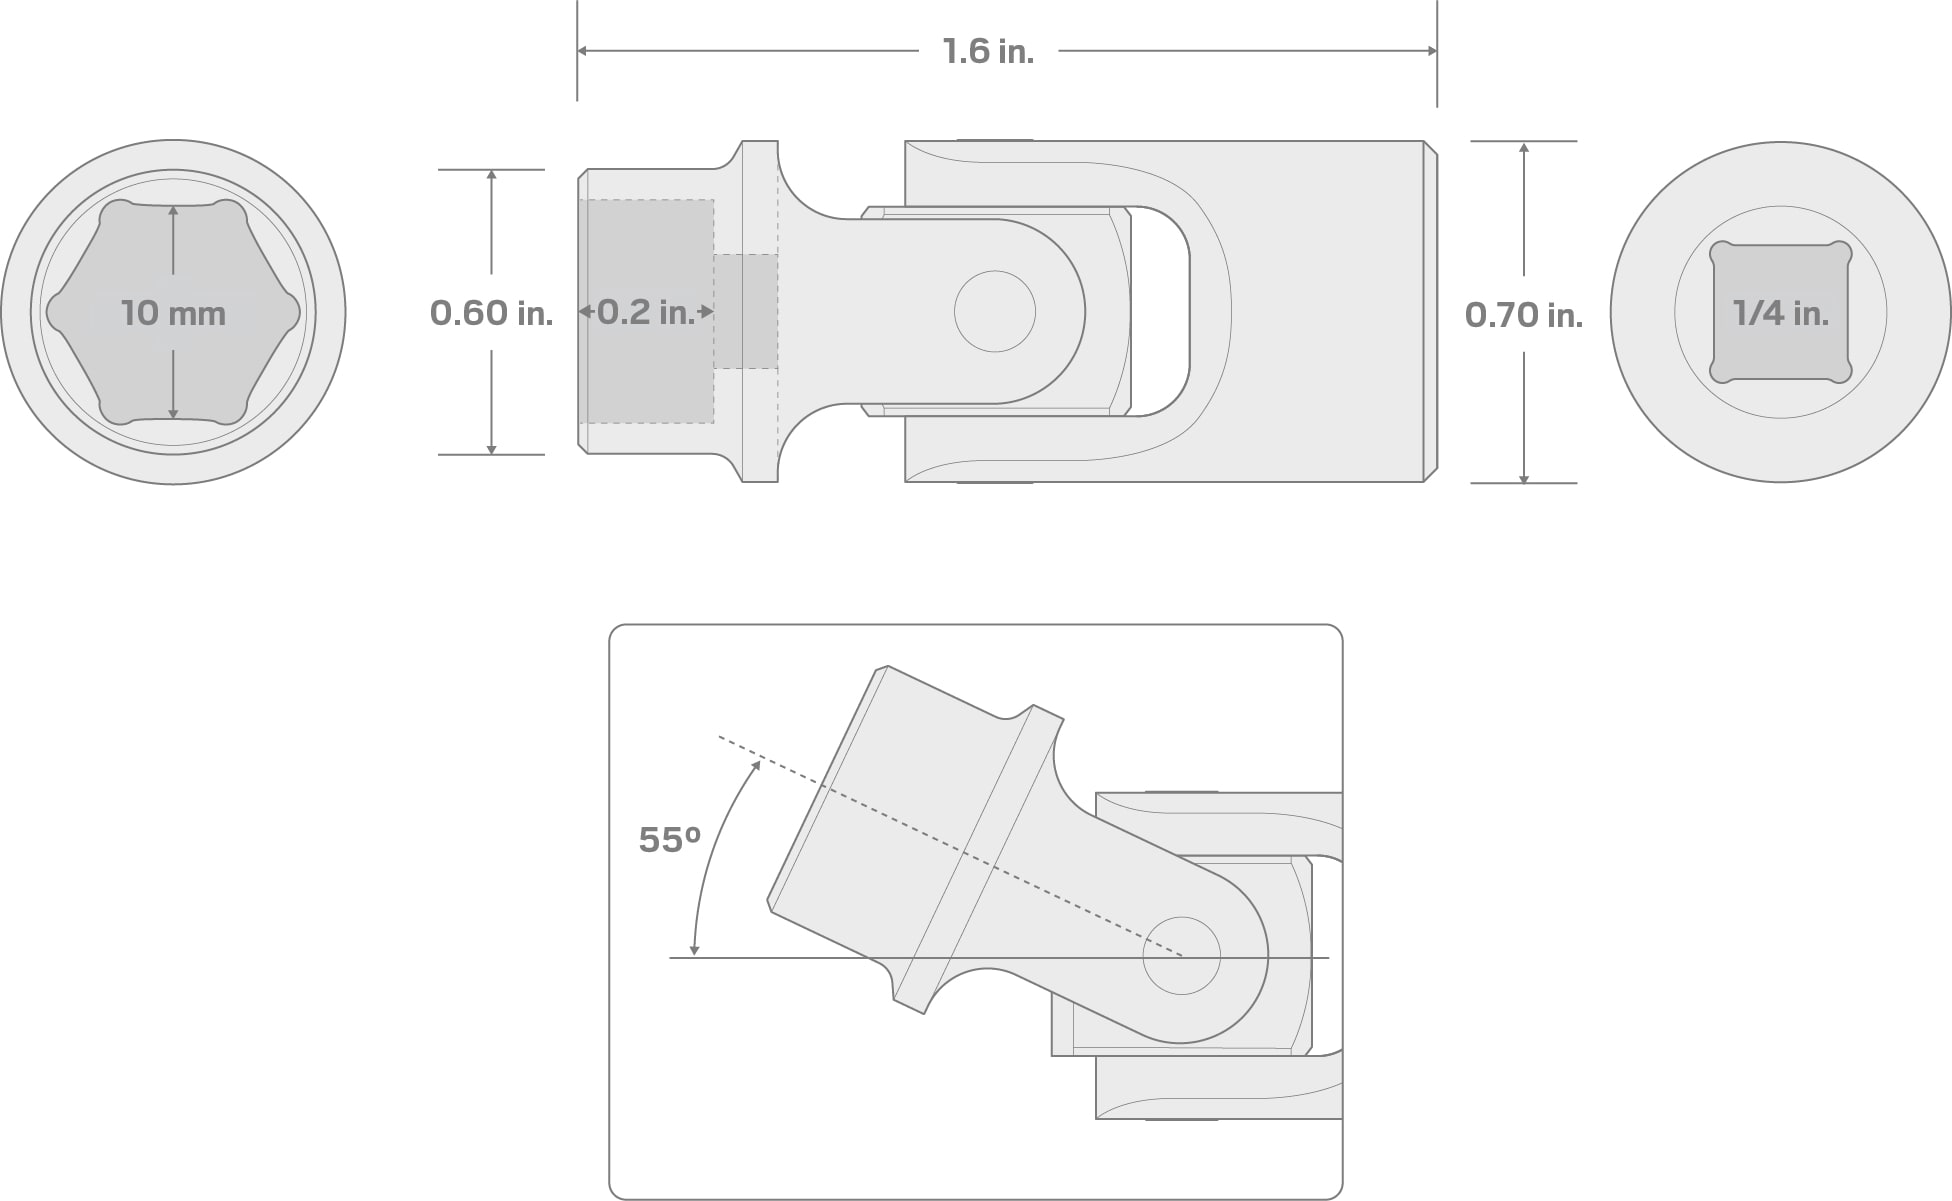 Specs for 3/8 Inch Drive x 3/8 Inch Universal Joint Socket